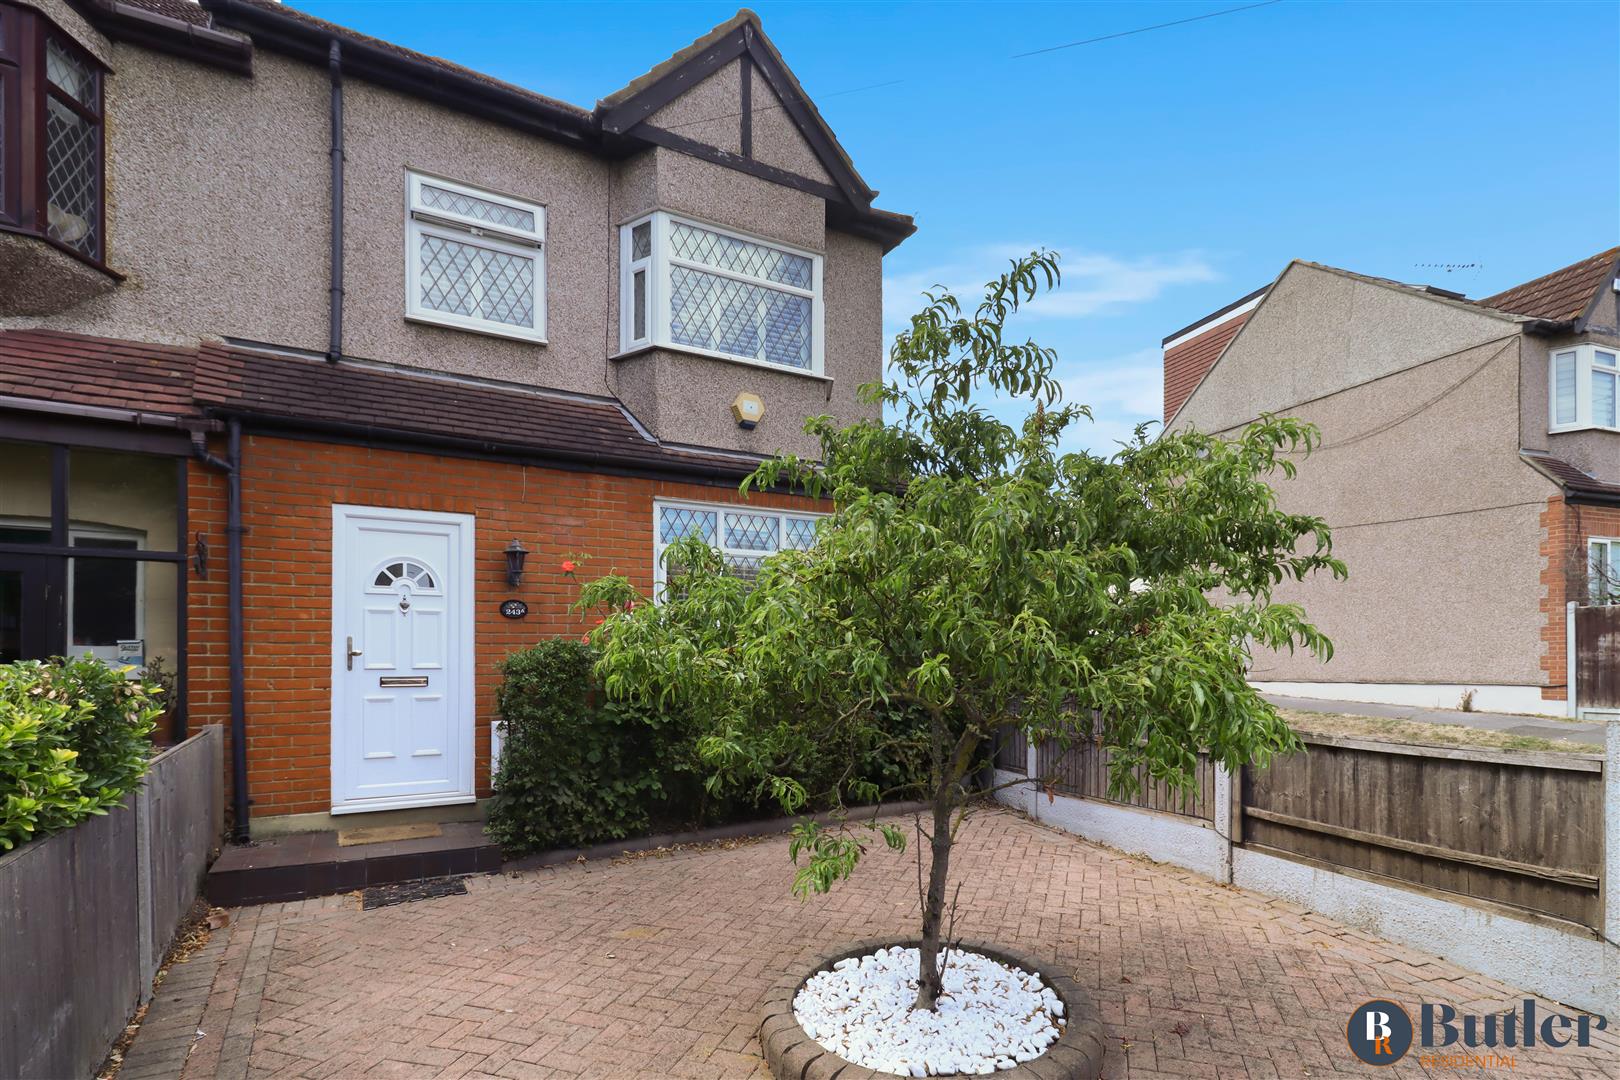 3 bed end of terrace house for sale in Larkshall Road, London, E4 9